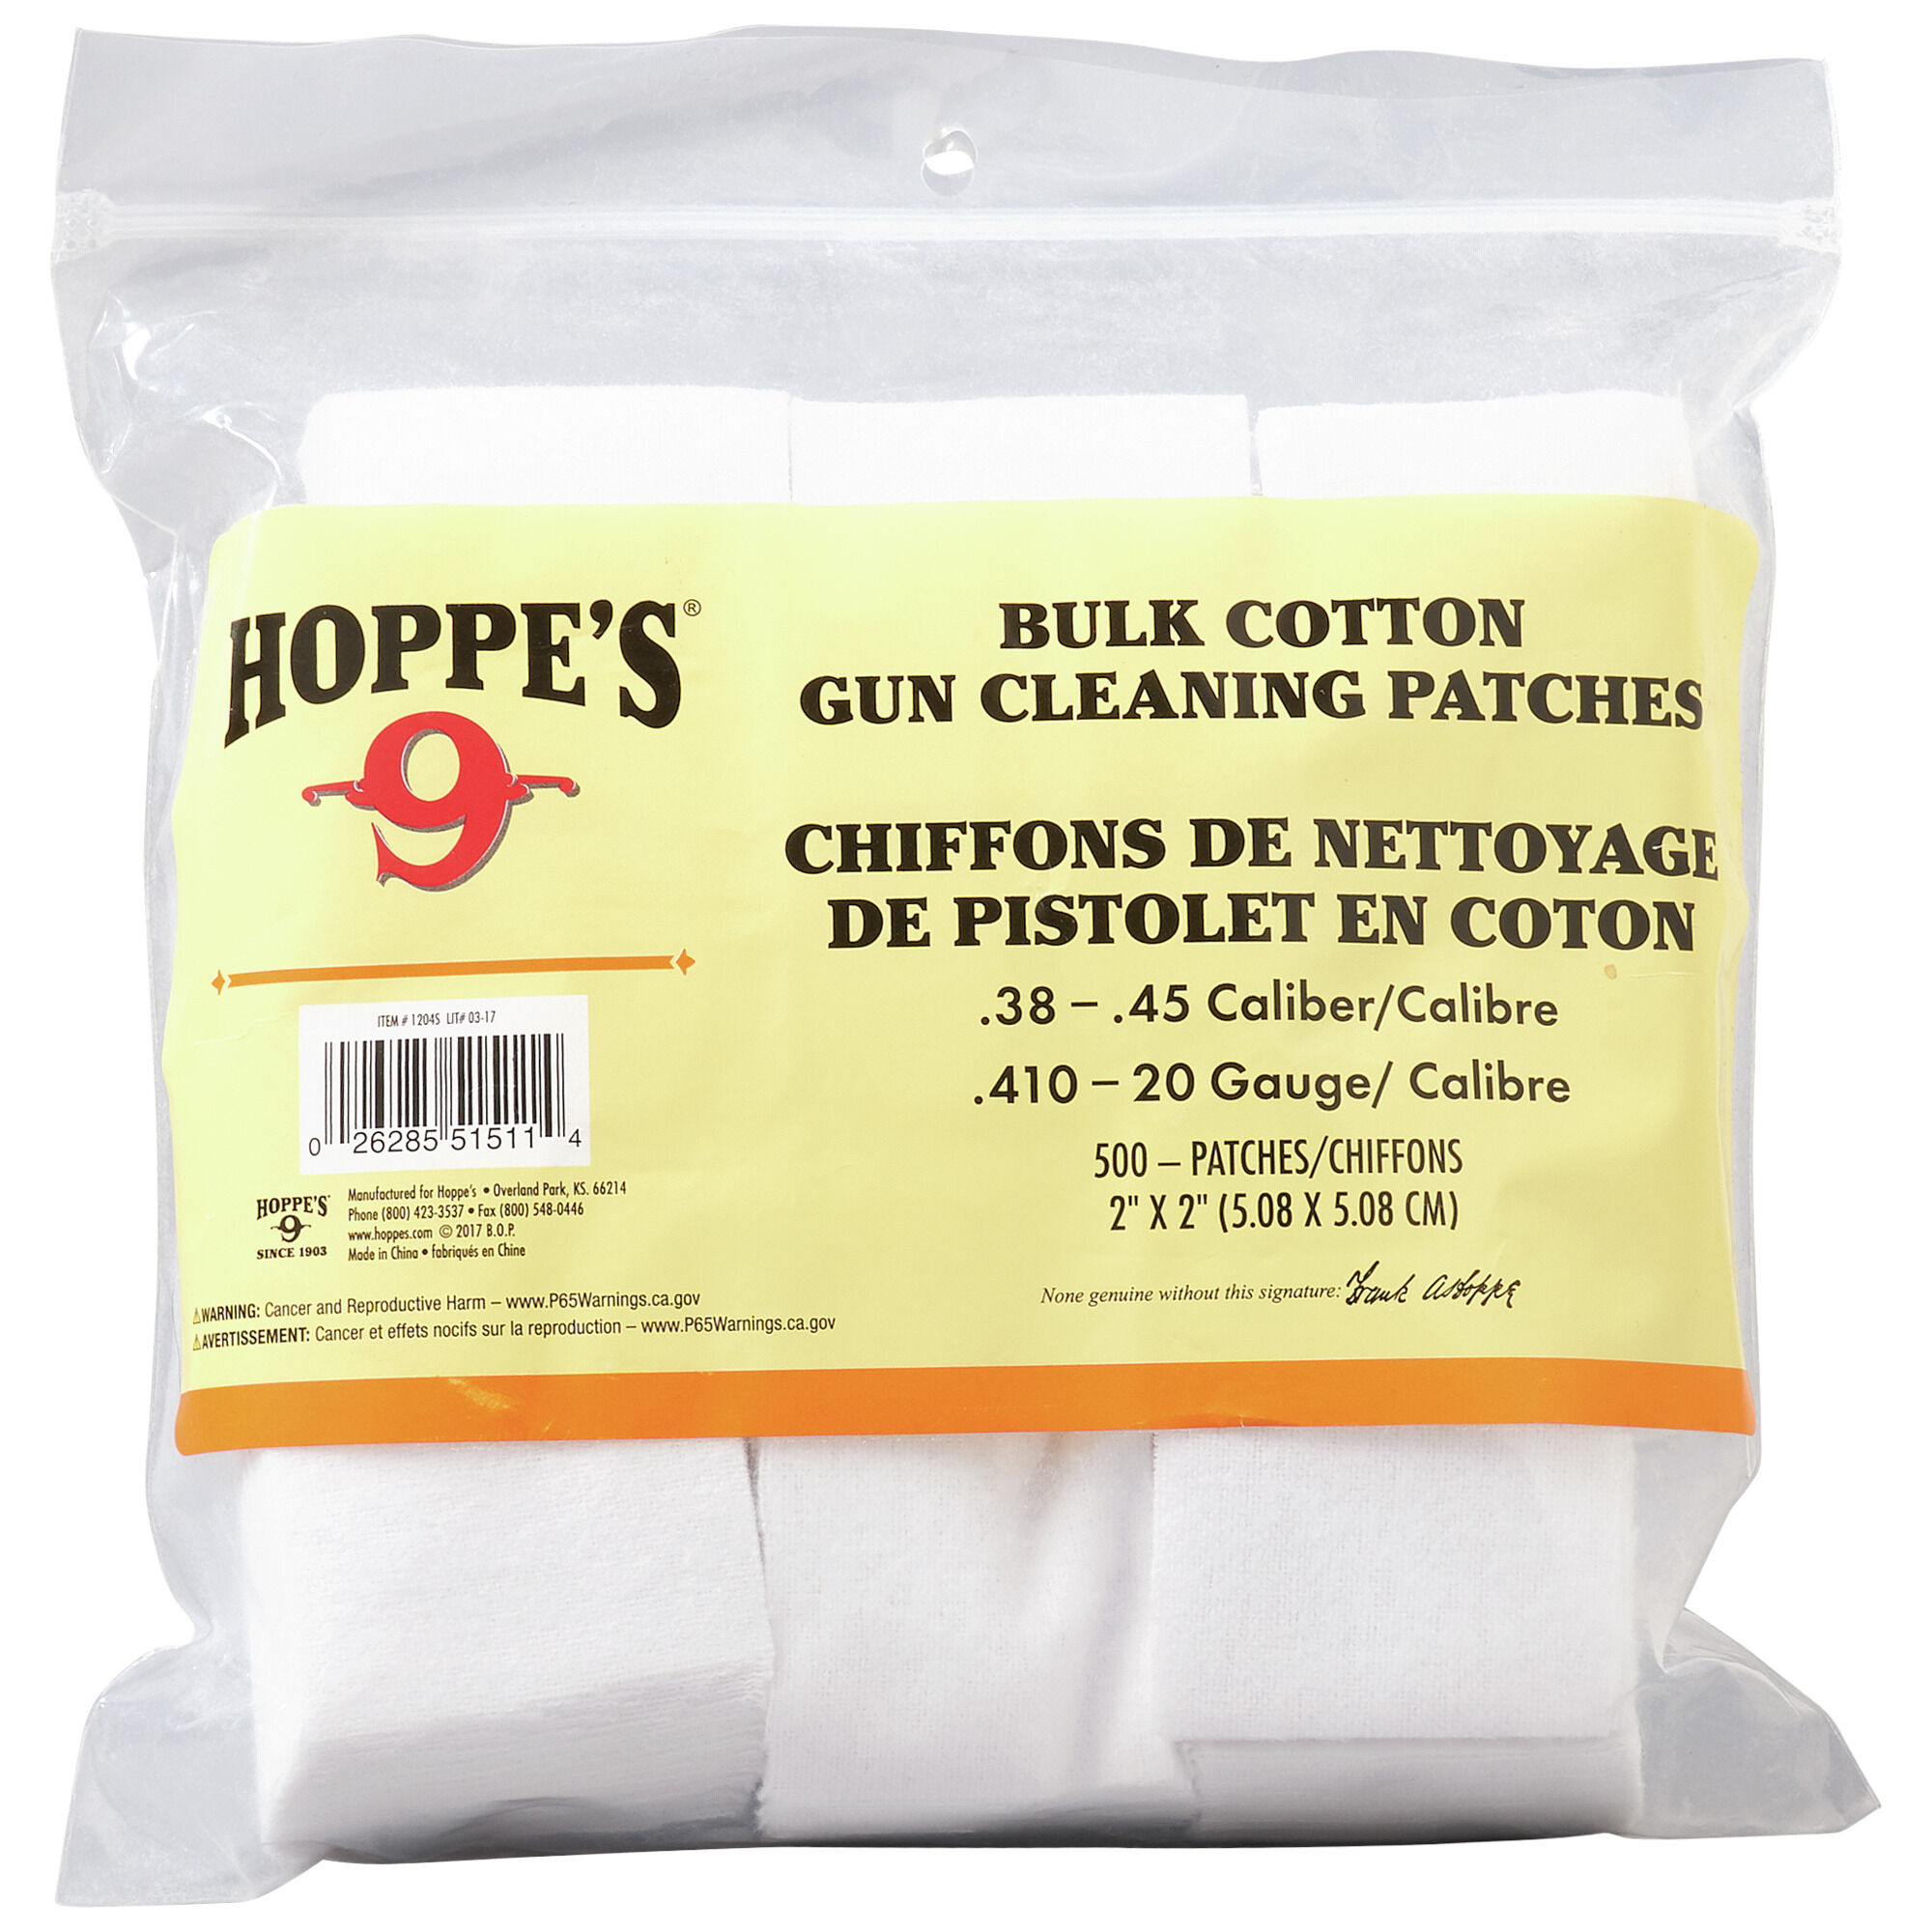 50 Pack 9 Gun Cleaning Patch Hoppe's No 1203 .270-.35 Caliber NEW 